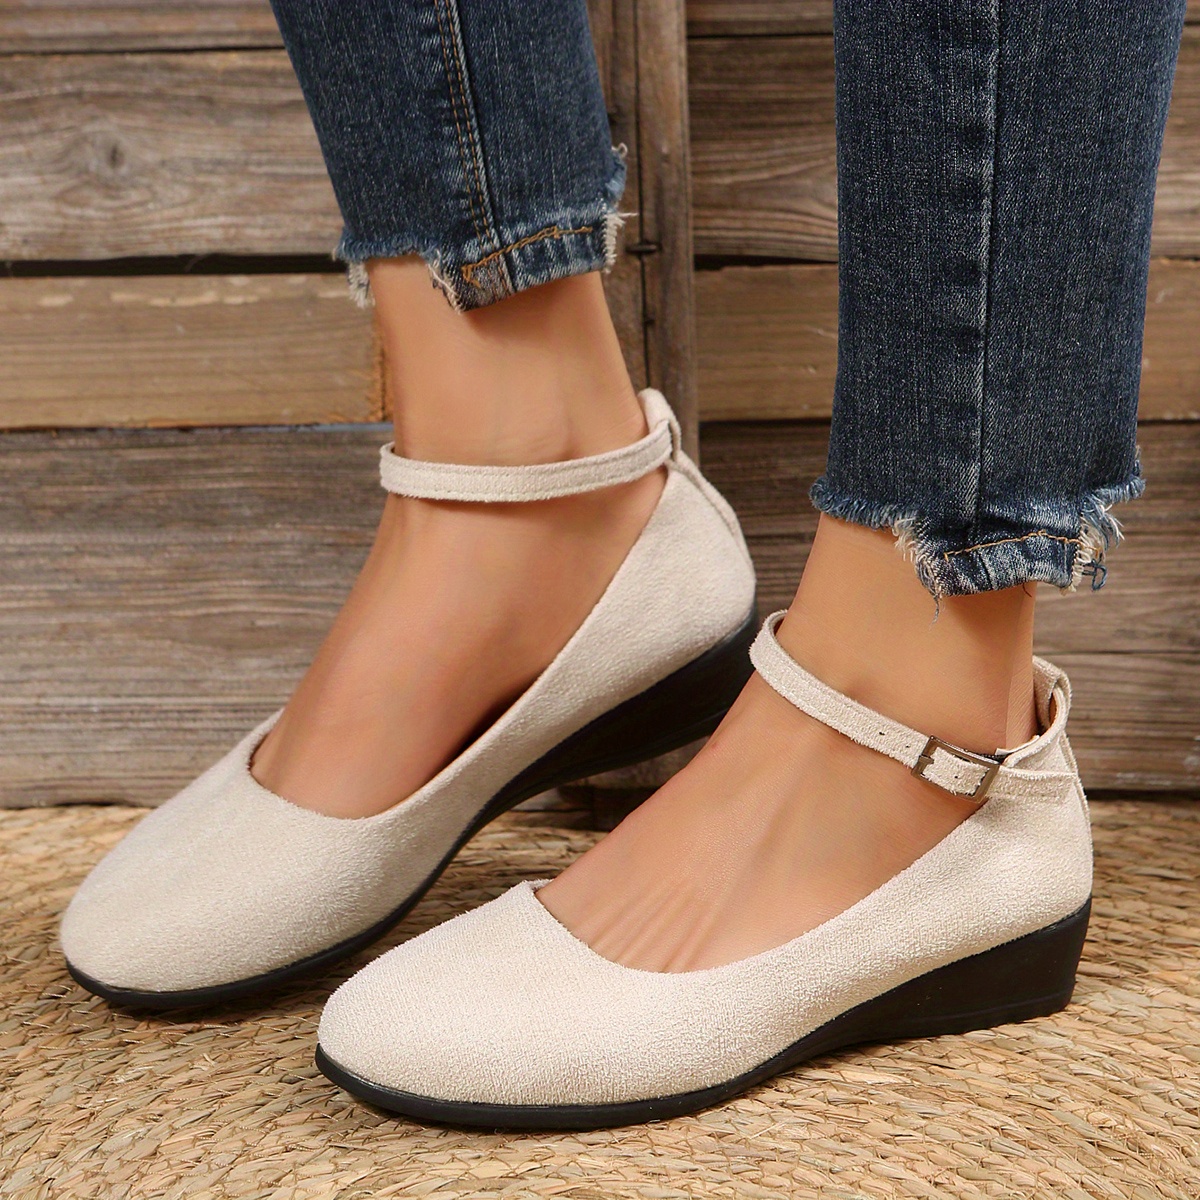 BG TODAYS SALE!! ADJUSTABLE HOOK AND LOOP STRAP WEDGE SHOES FOR LADIES  FASHION HIGH QUALITY